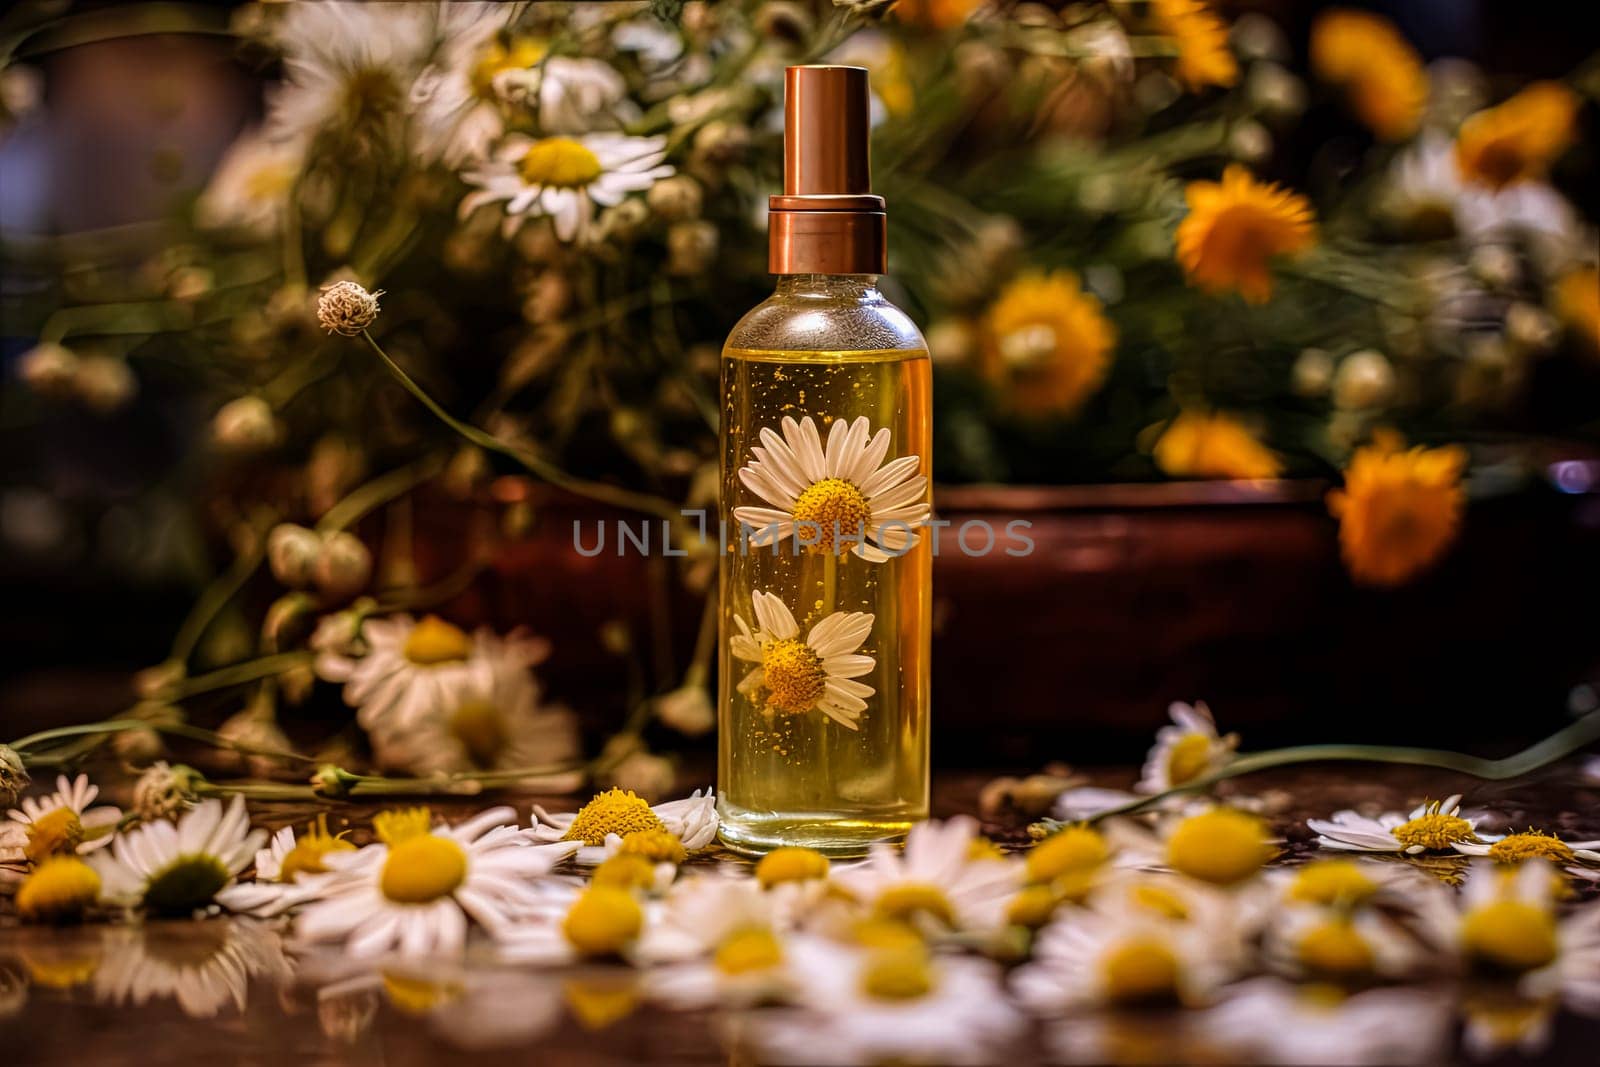 A bottle of essential oil is on a table next to a bunch of yellow flowers. The bottle is made of glass and has a cork stopper